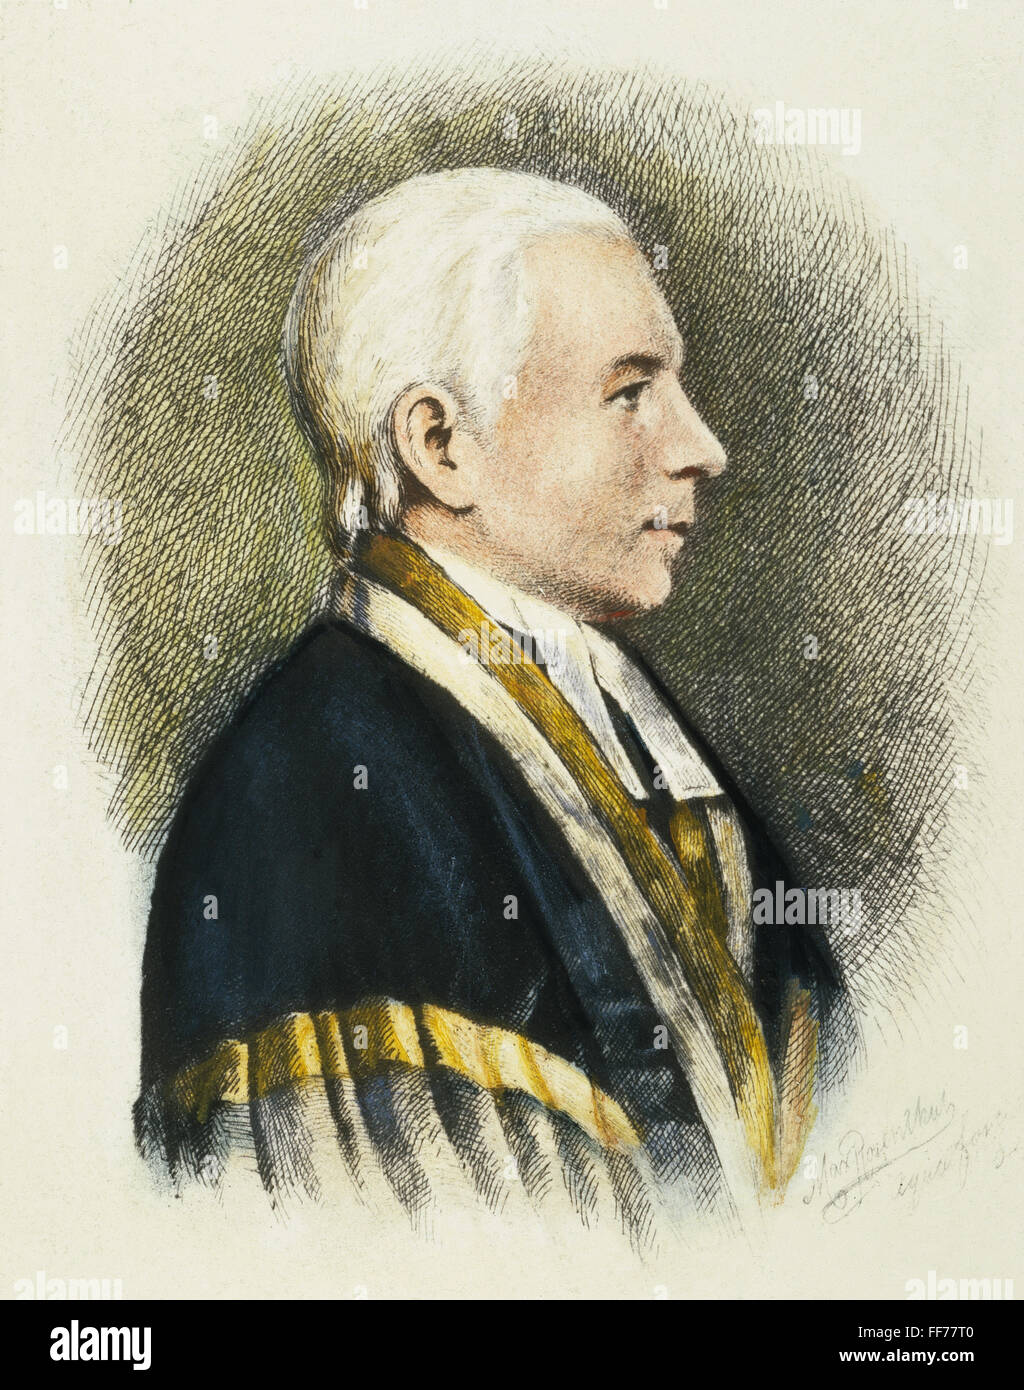 WILLIAM PATERSON (1745-1806). /nAmerican jurist: colored etching by Max Rosenthal, 1890. Stock Photo